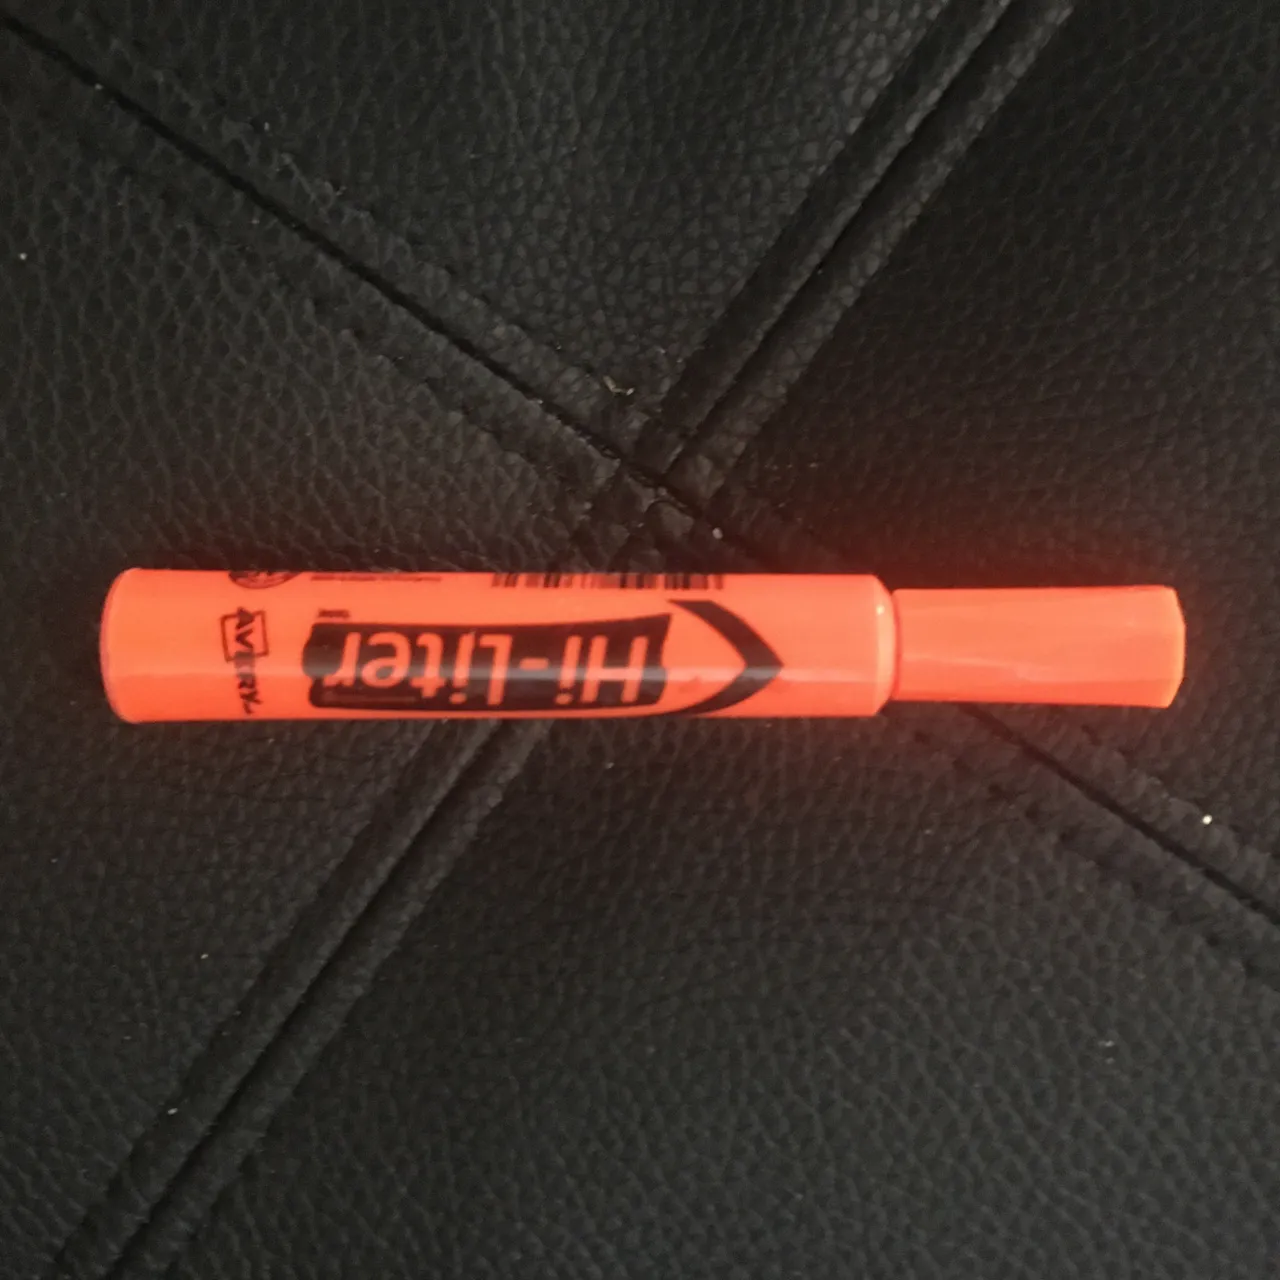 Highlighters photo 1